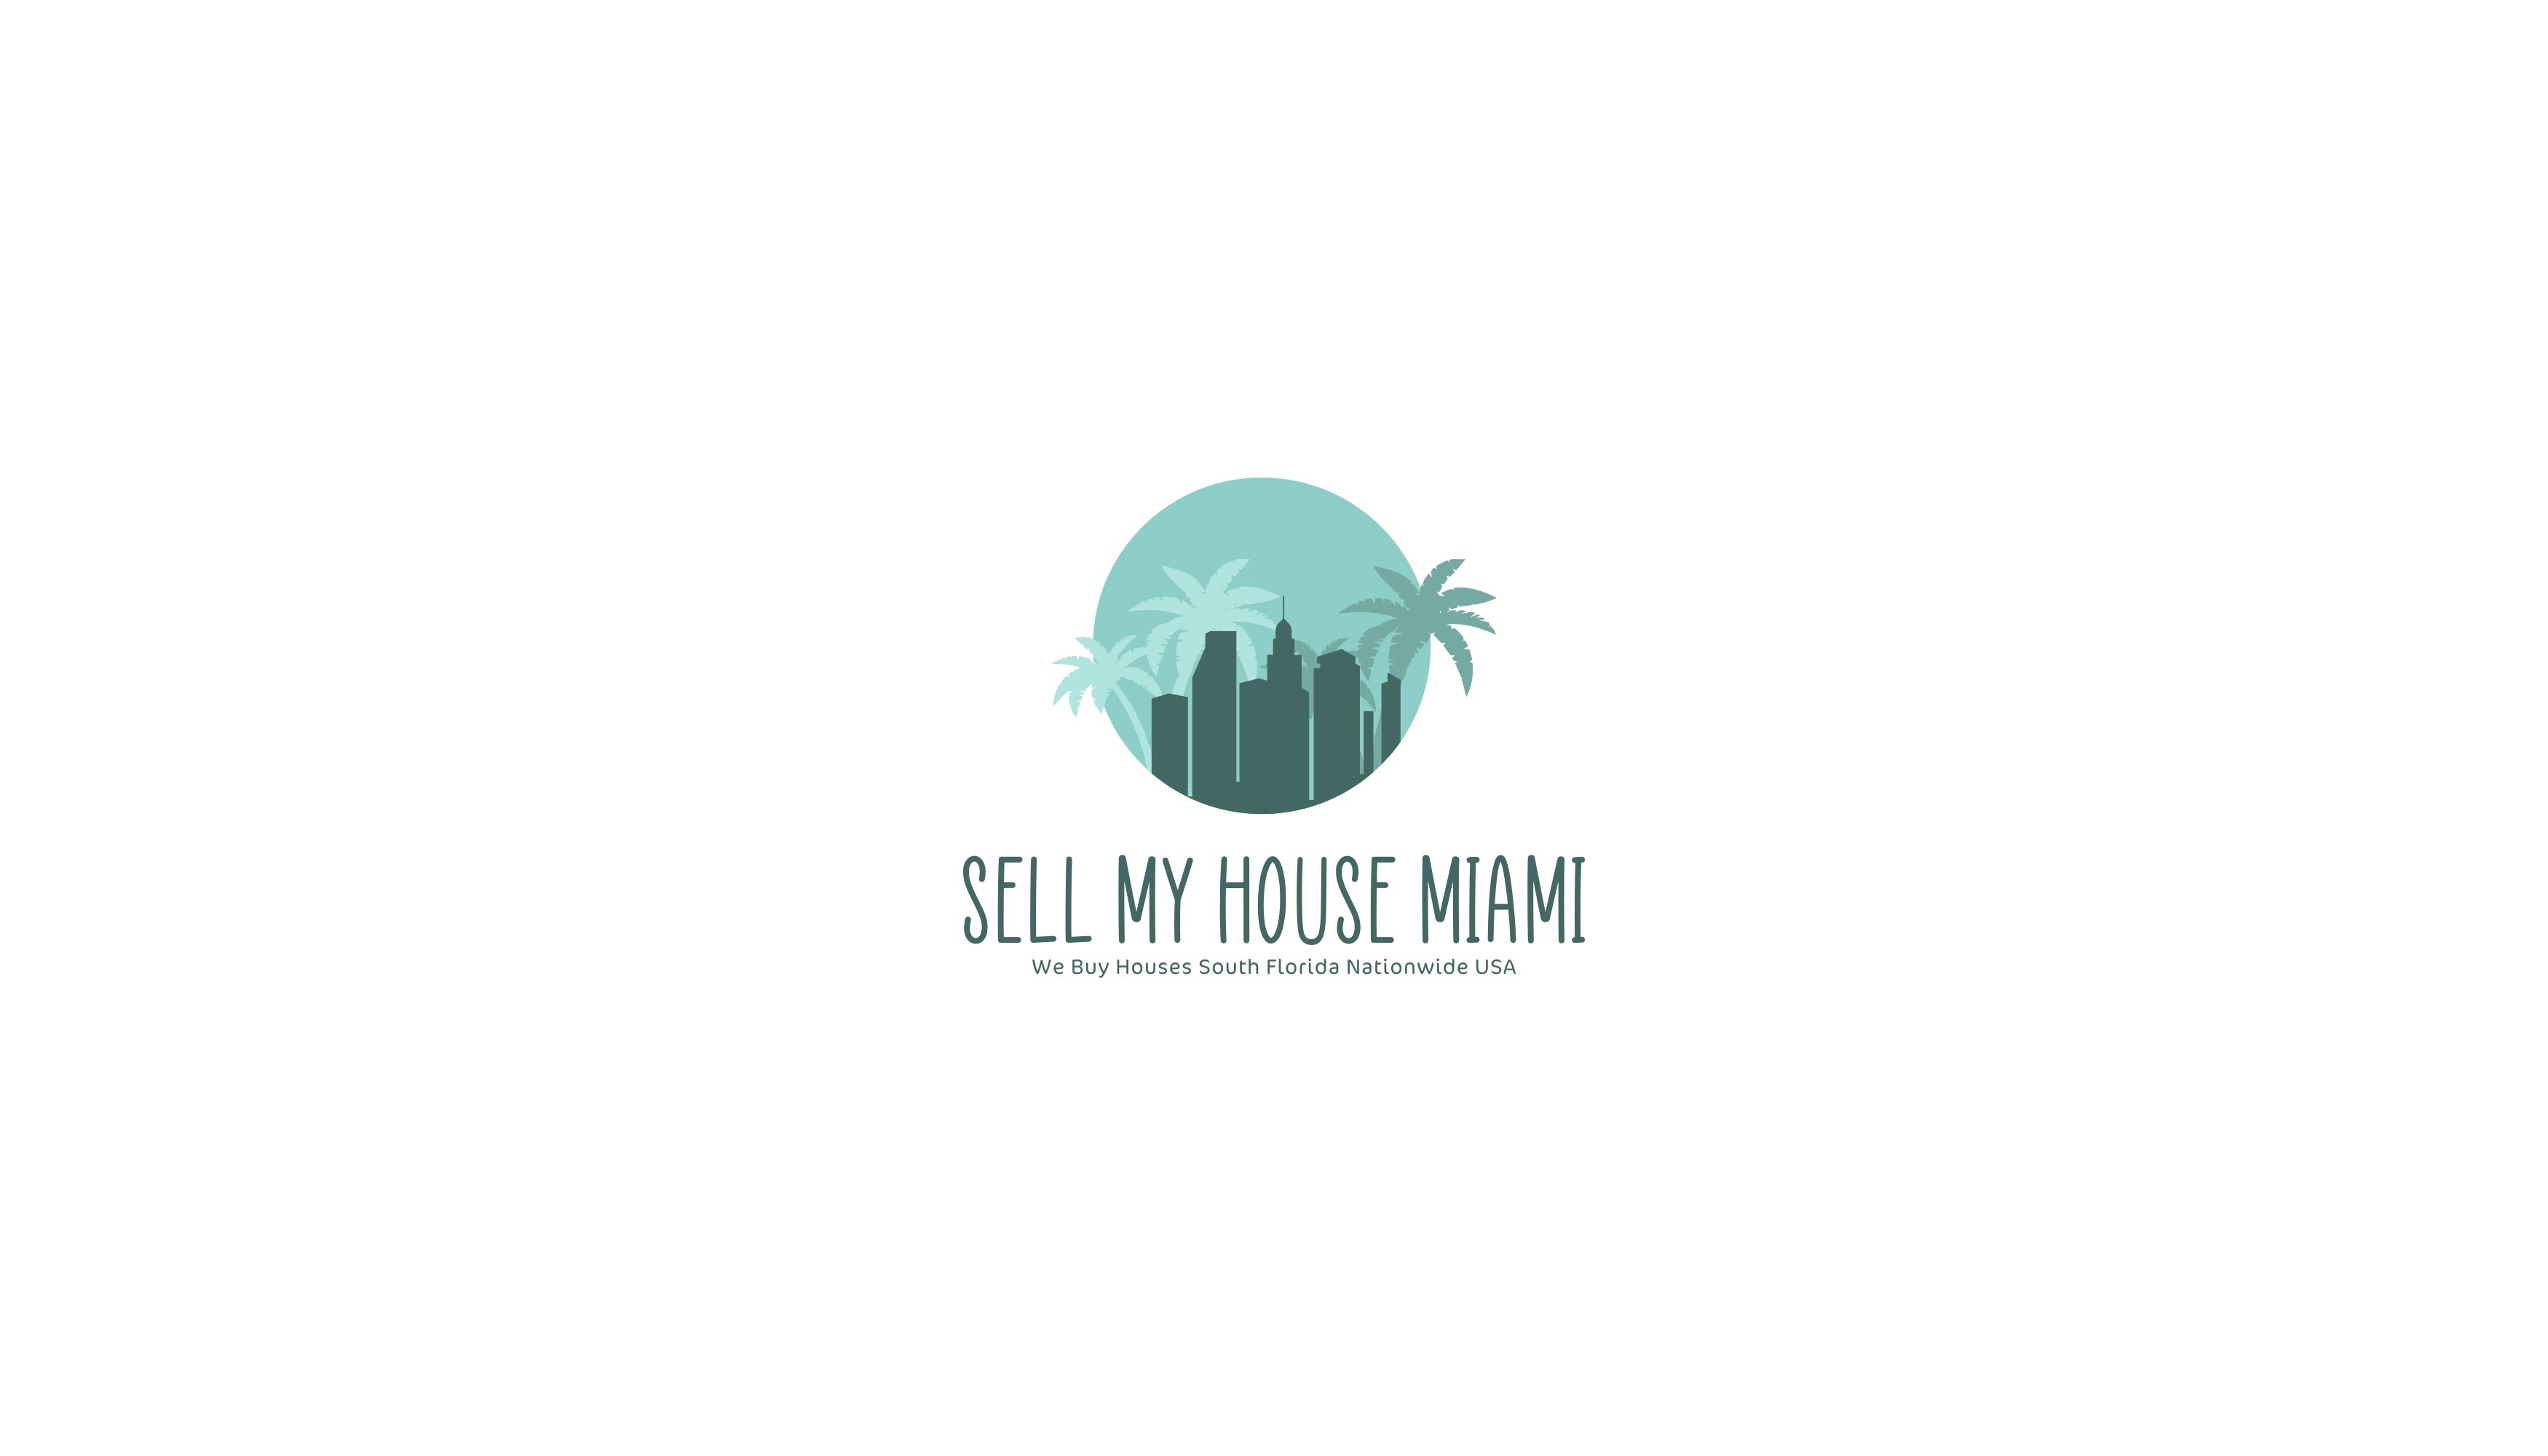 Sell My House Fast for Cash Nationwide USA. We Buy Houses. Fair Cash Offers. We Buy Houses Miami. Any Location, Houses & Land: Residential, Commercial, Industrial, Agricultural. Sell My House Fast Miami Florida.